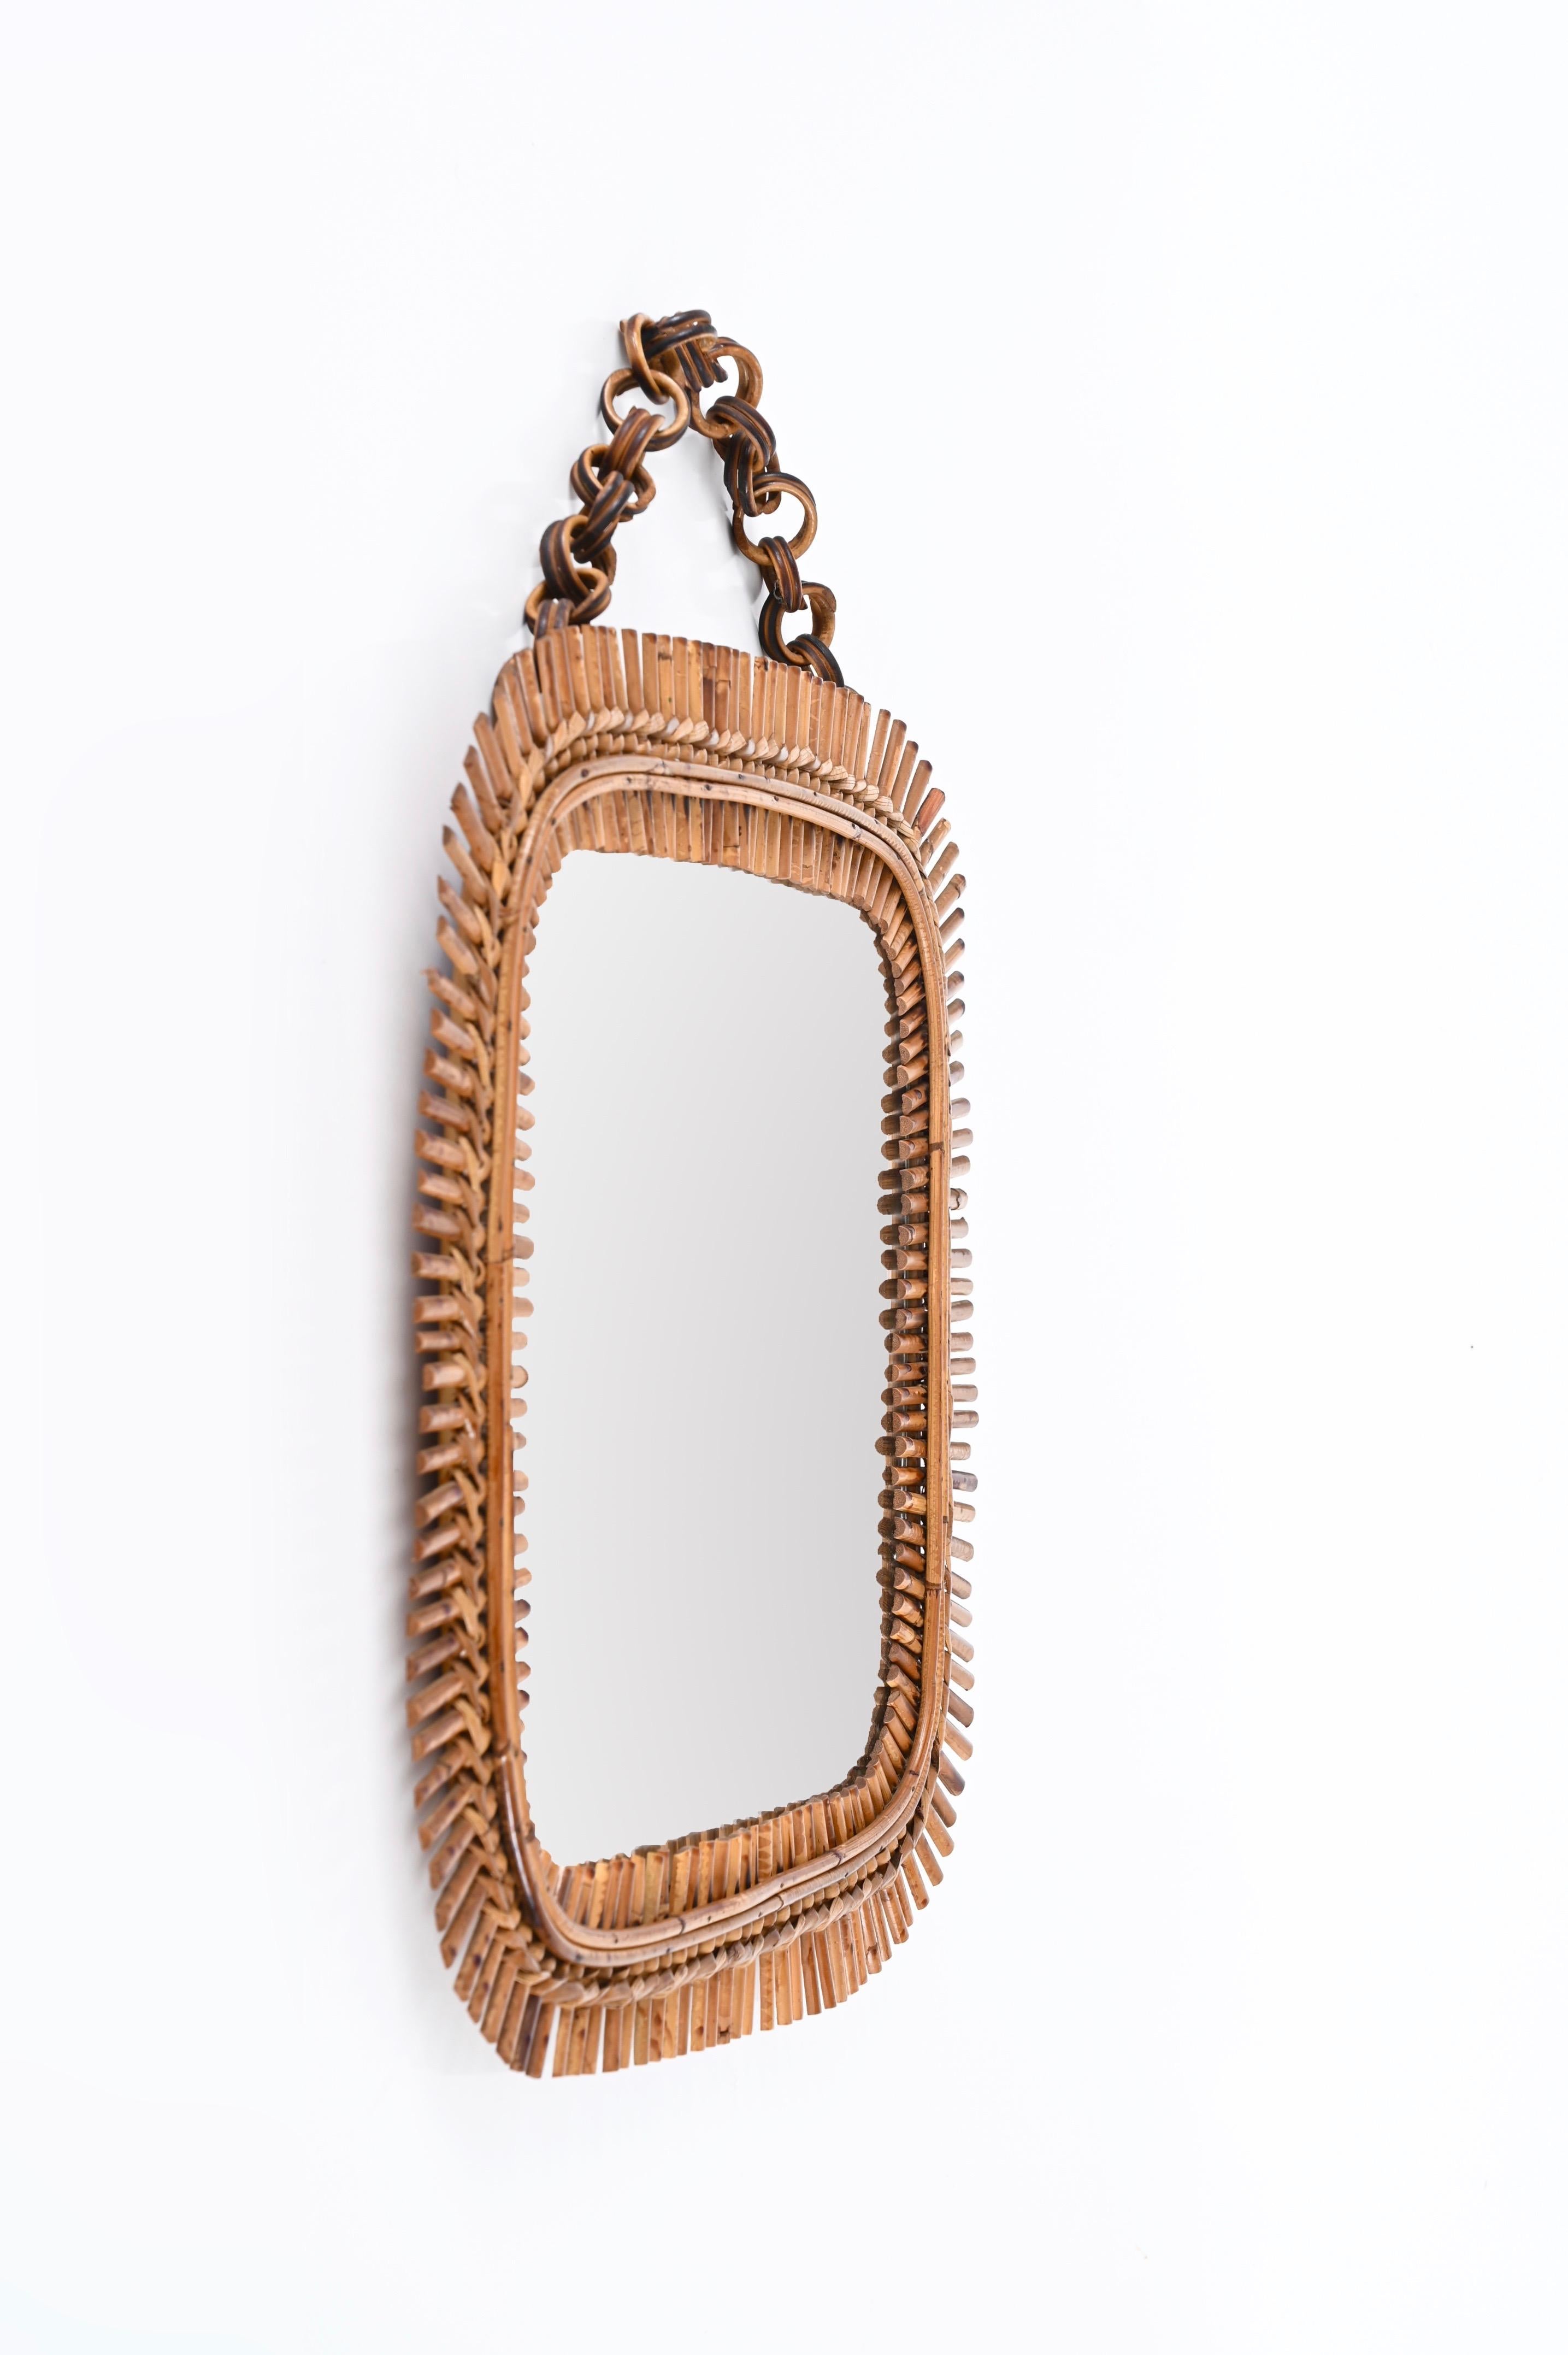 Hand-Woven Midcentury French Riviera Square Wall Mirror in Bamboo and Rattan, Italy 1960s For Sale